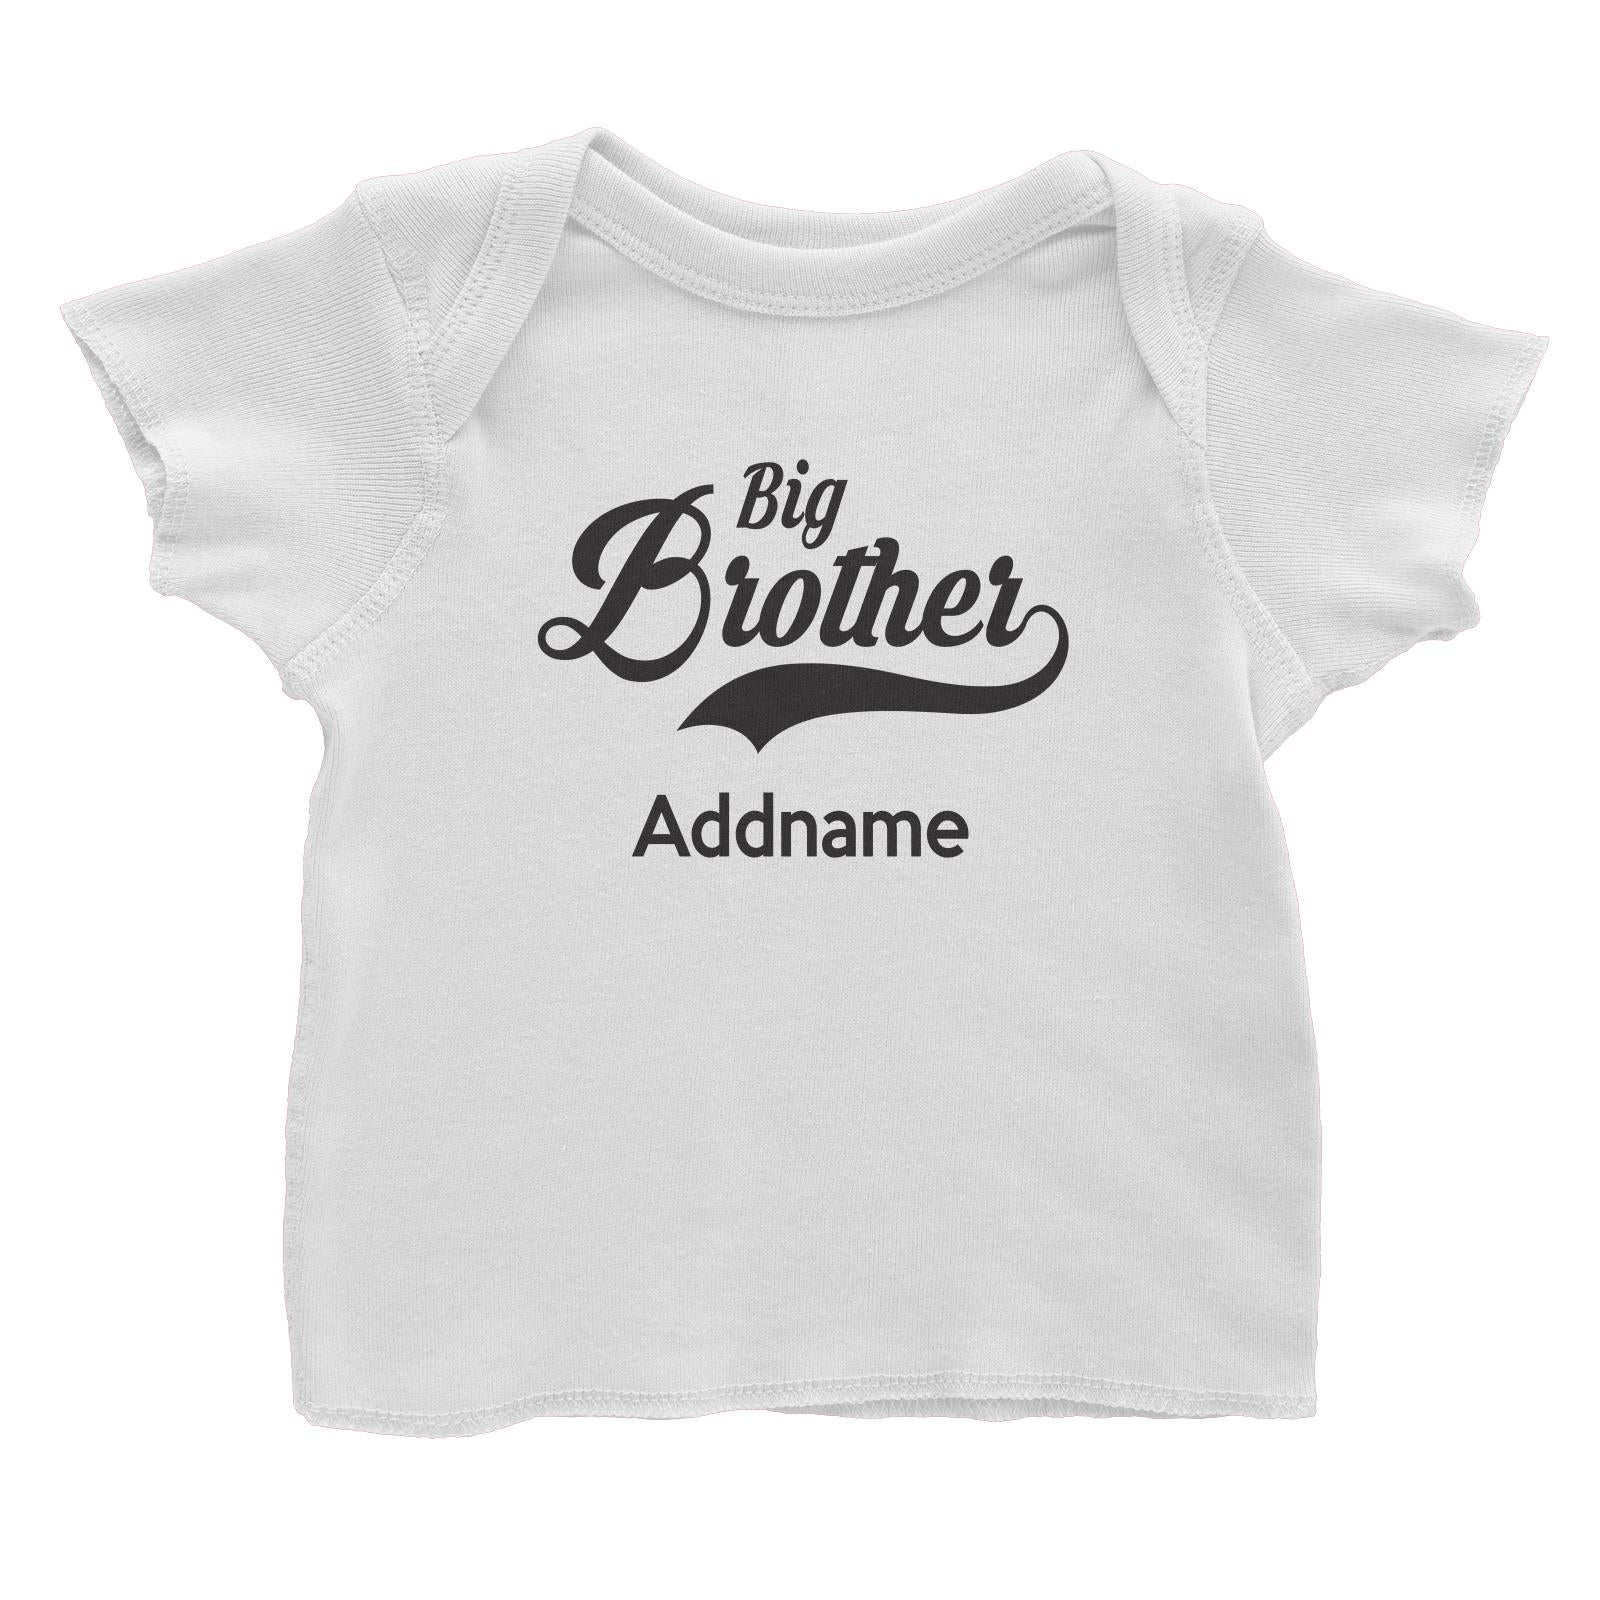 Retro Big Brother Addname Baby T-Shirt